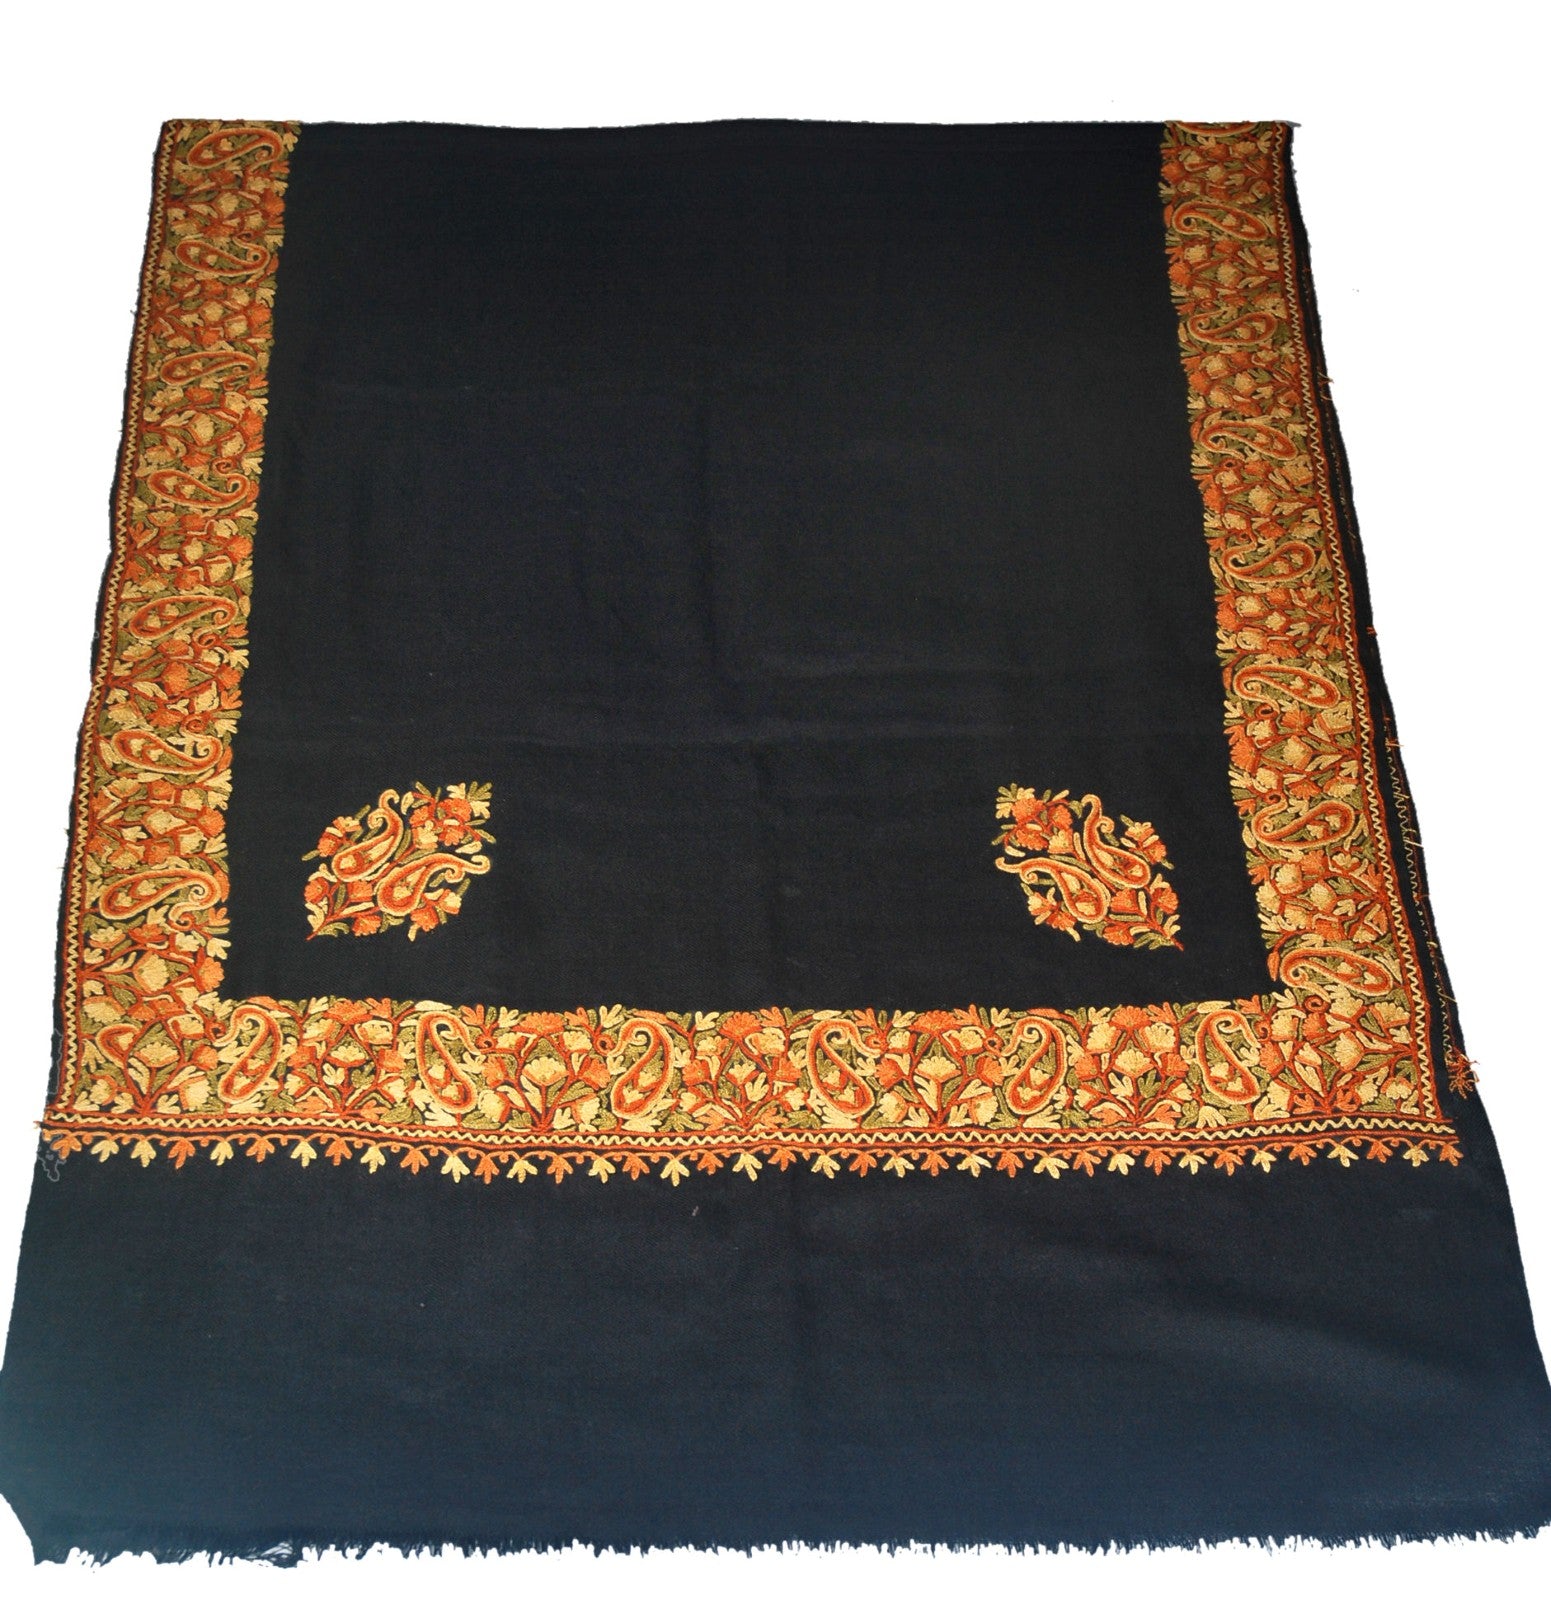 Embroidered Wool Shawl Wrap Throw Black, Multicolor Embroidery #WS-402